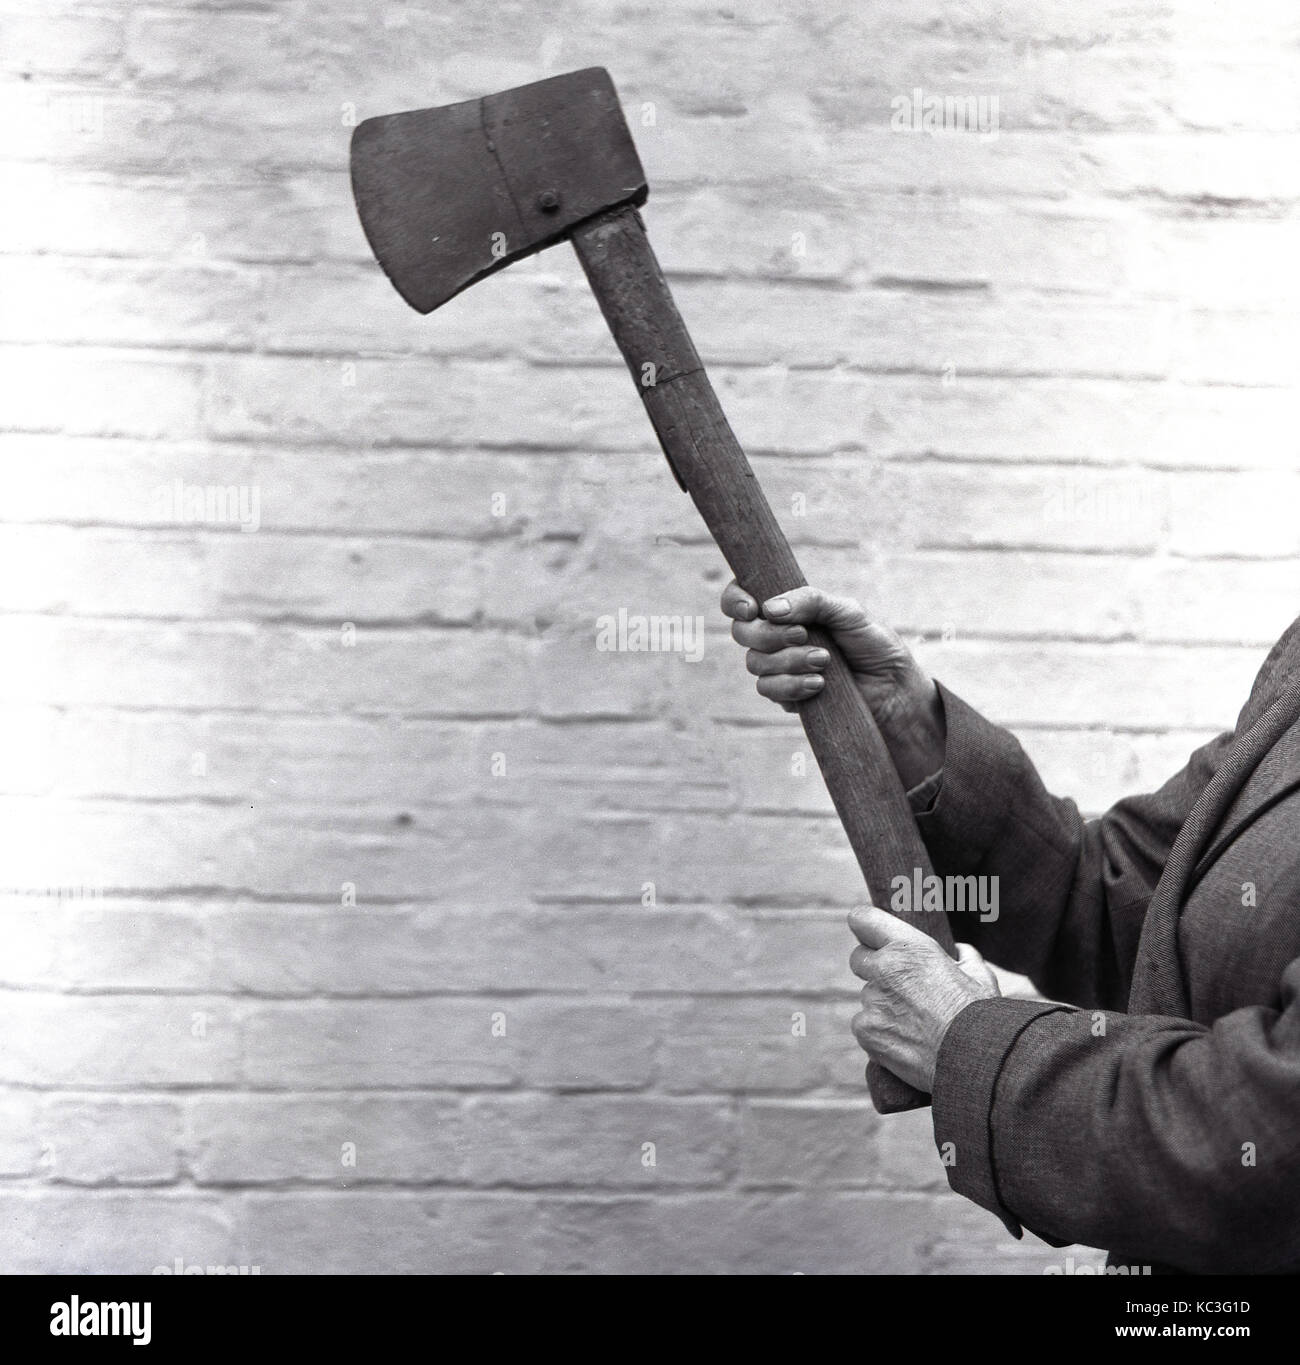 1964, historical, person holding up a large axe, a tool used for splitting wood. The axe has a curved wooden handle and iron blade and is being held to show it, to demonstrate it to an audience, England, UK. Stock Photo